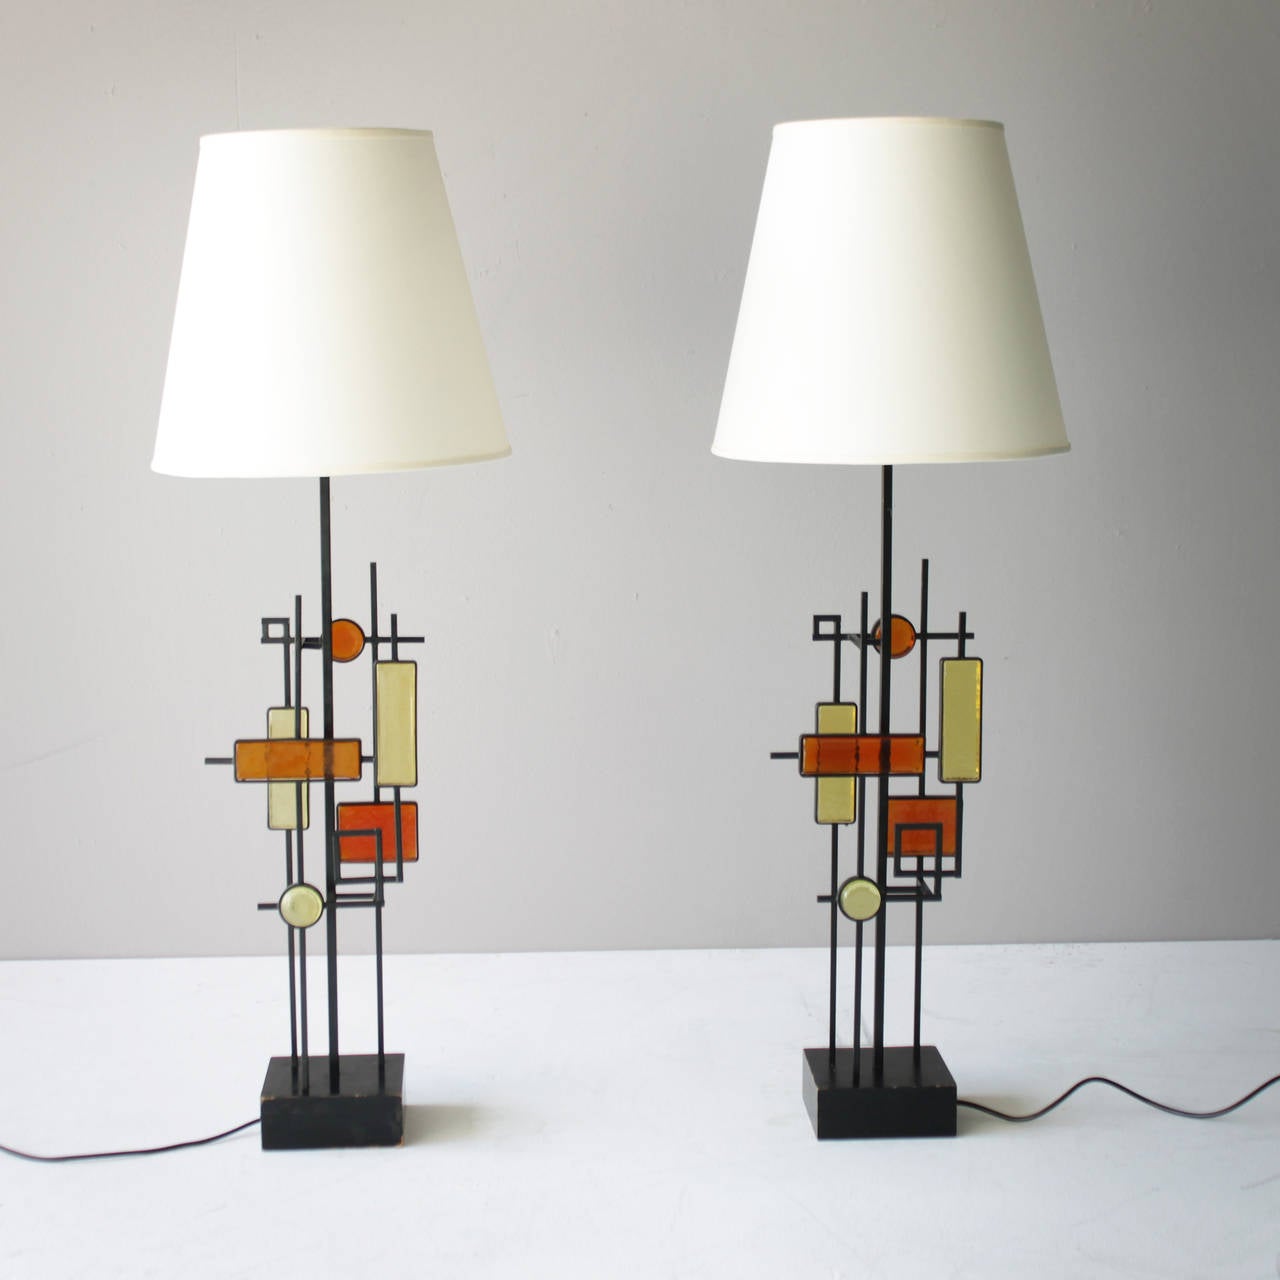 Pair of Lamps by Svend Aage Holm Sorensen 1